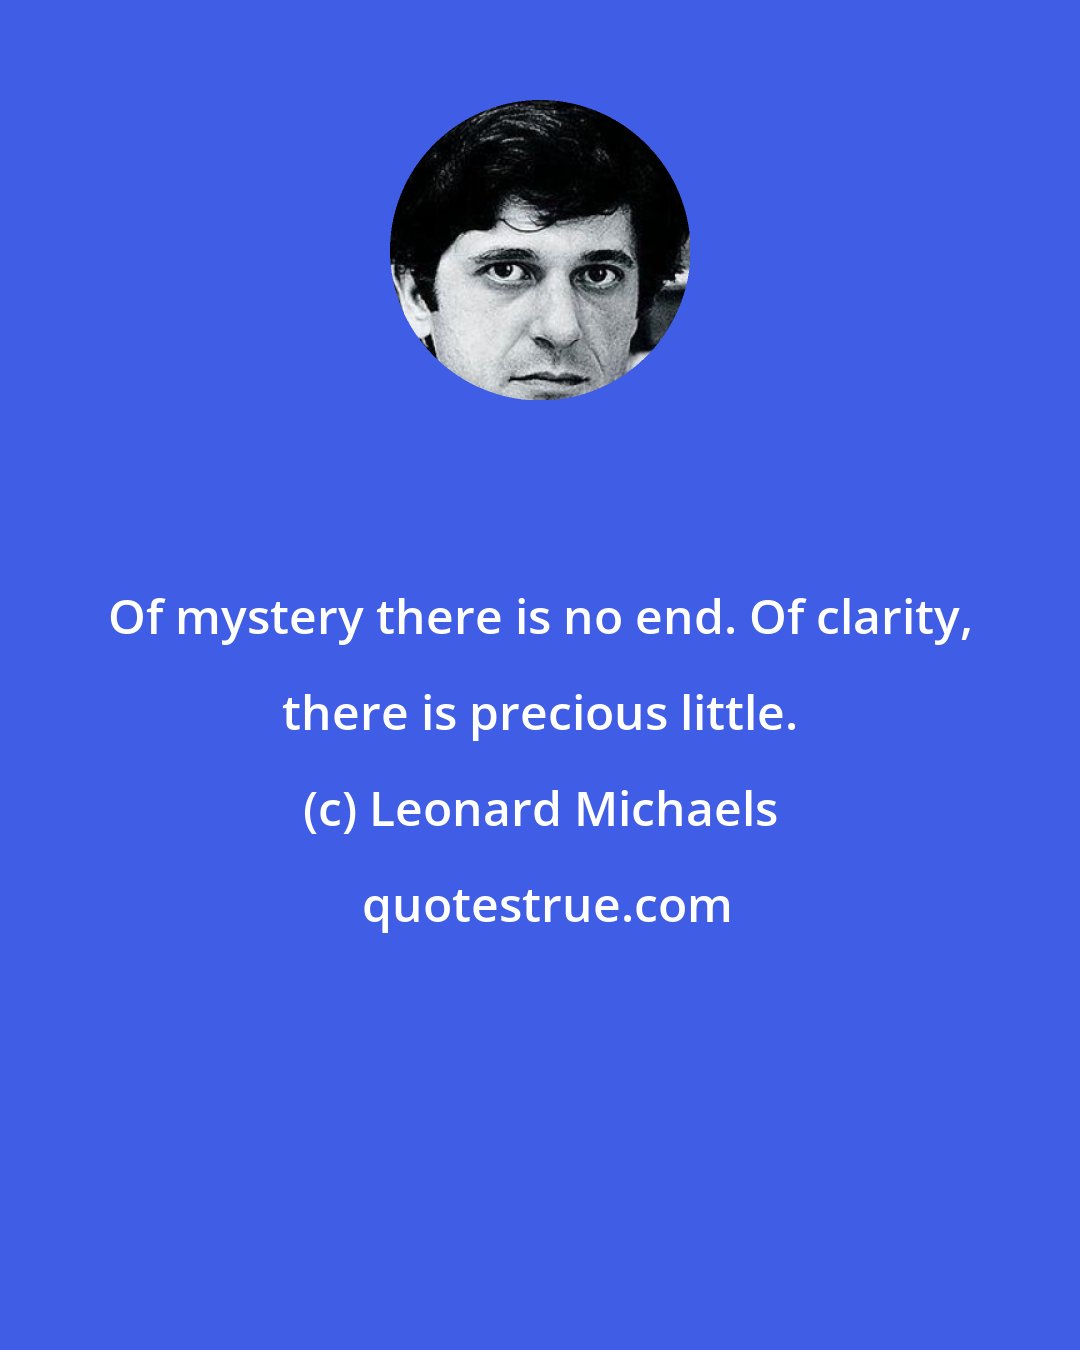 Leonard Michaels: Of mystery there is no end. Of clarity, there is precious little.